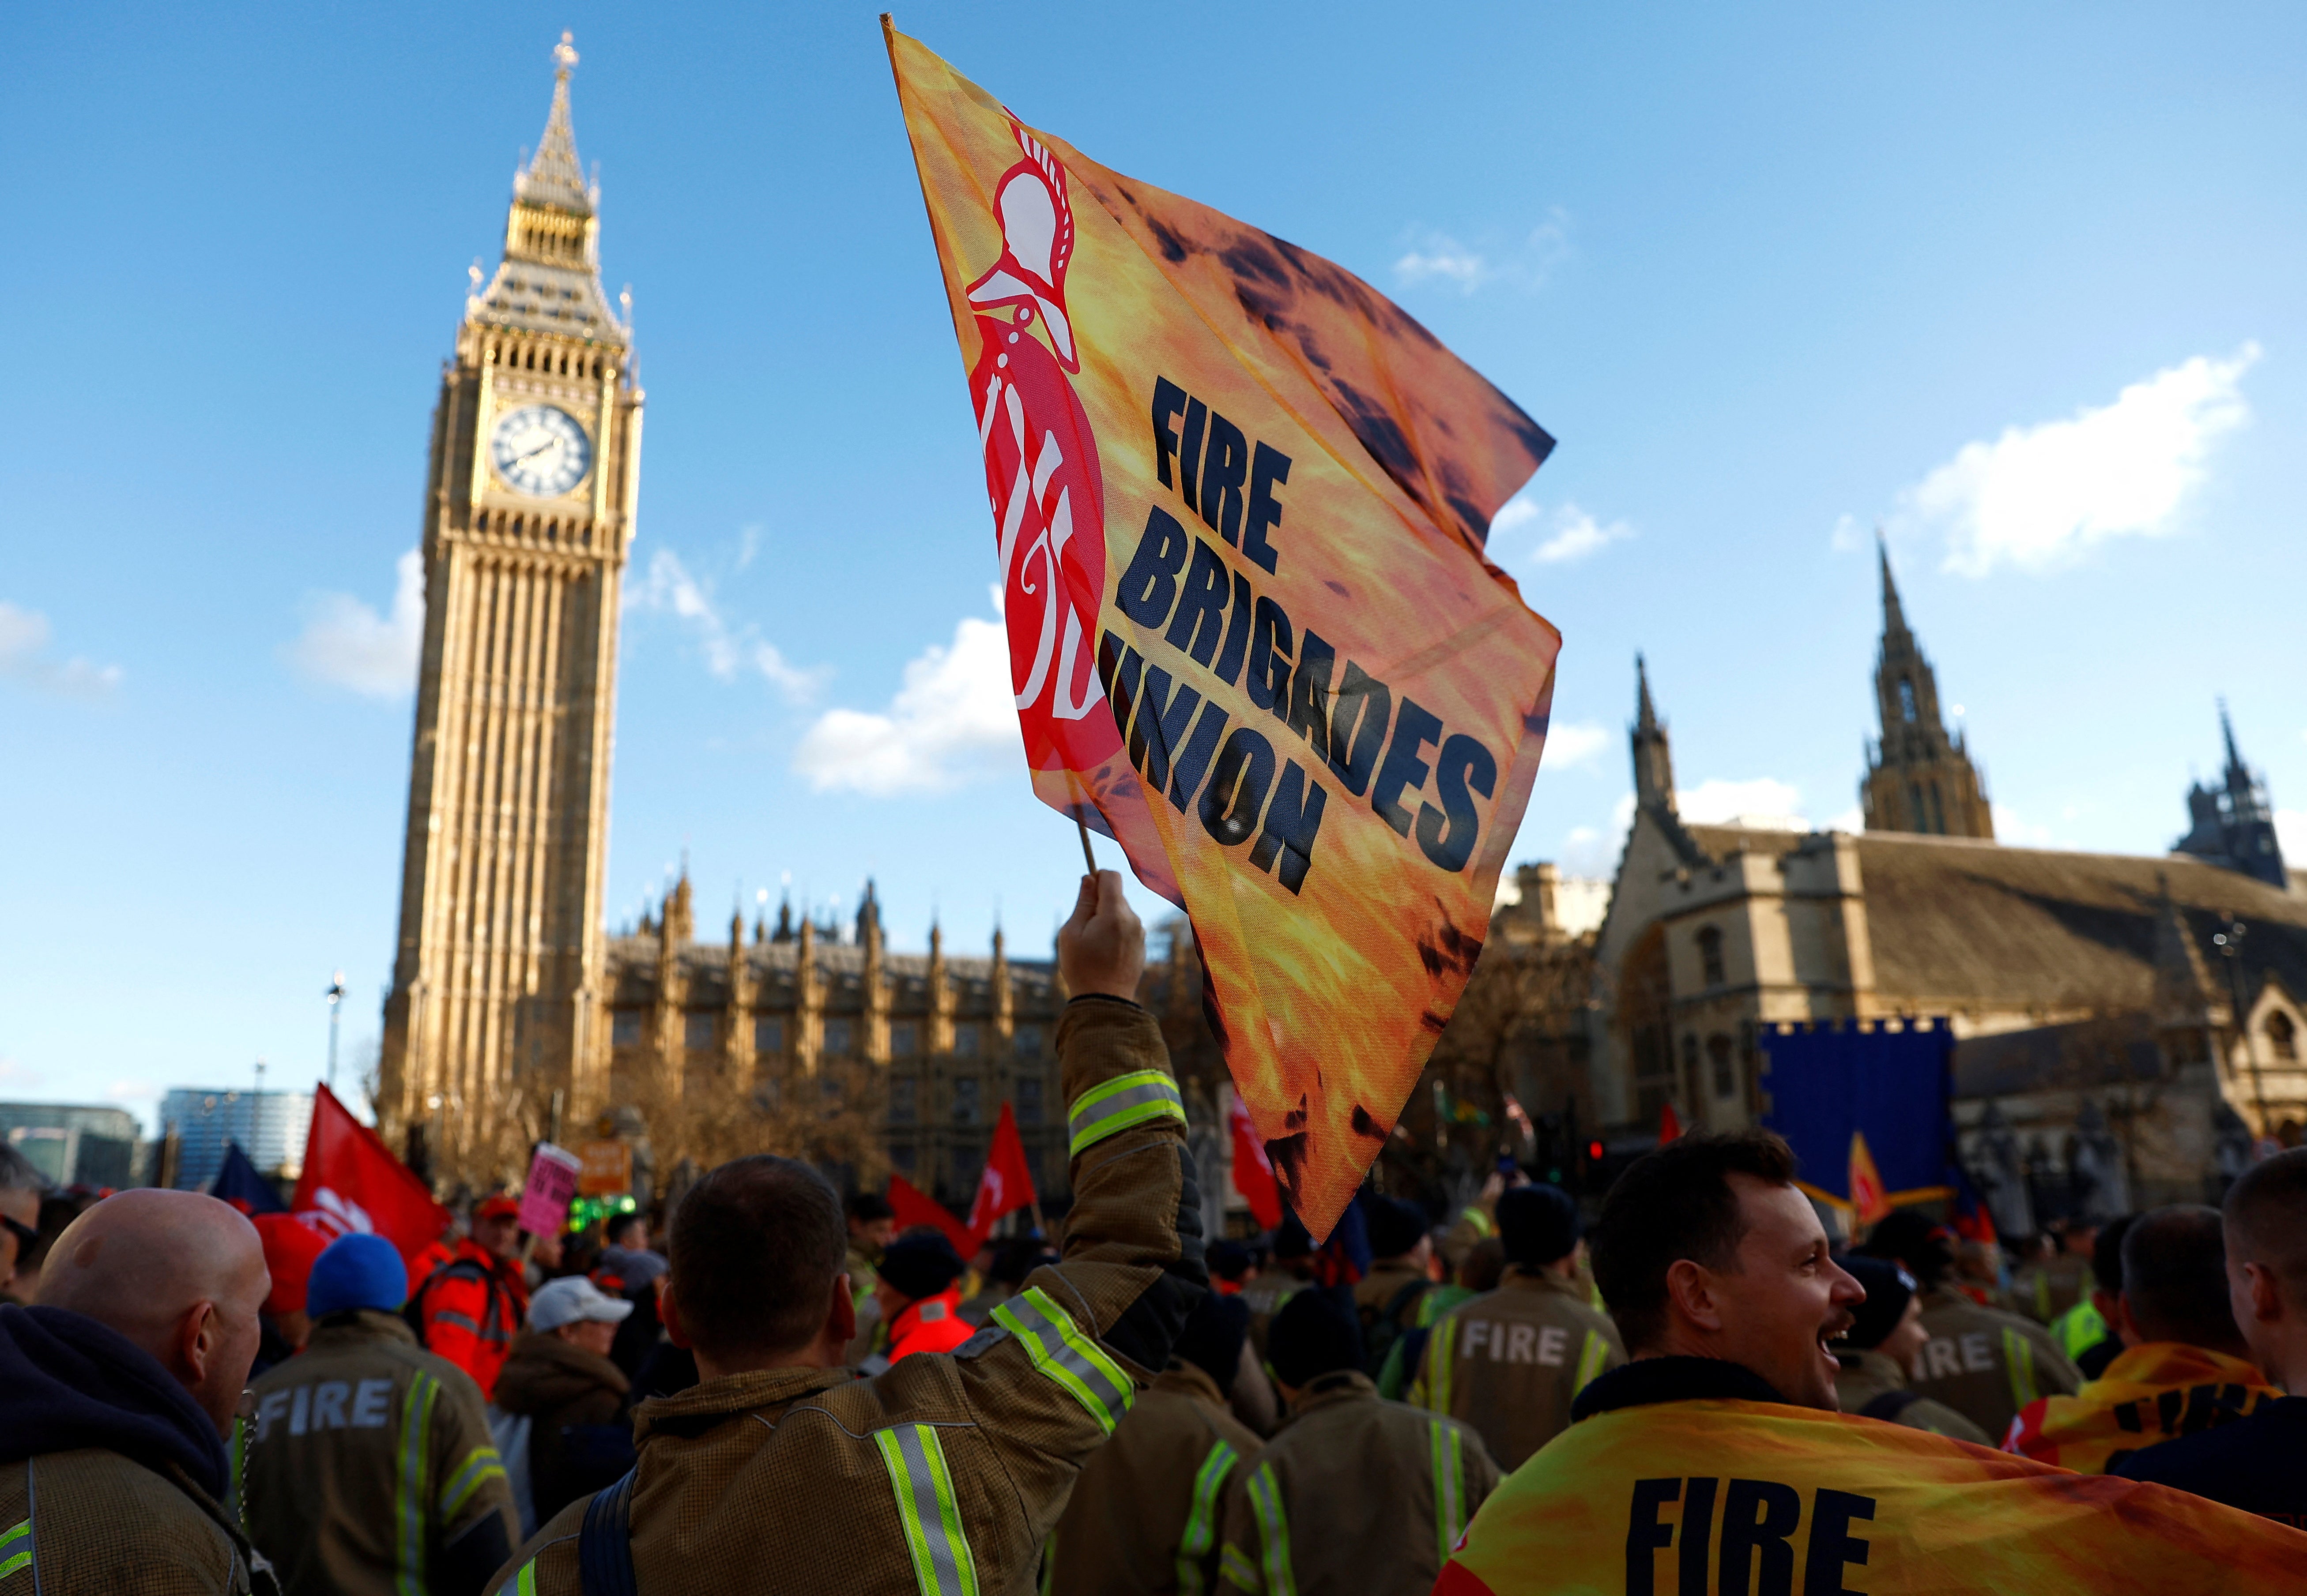 Members of the Fire Brigades Union are being balloted for industrial action